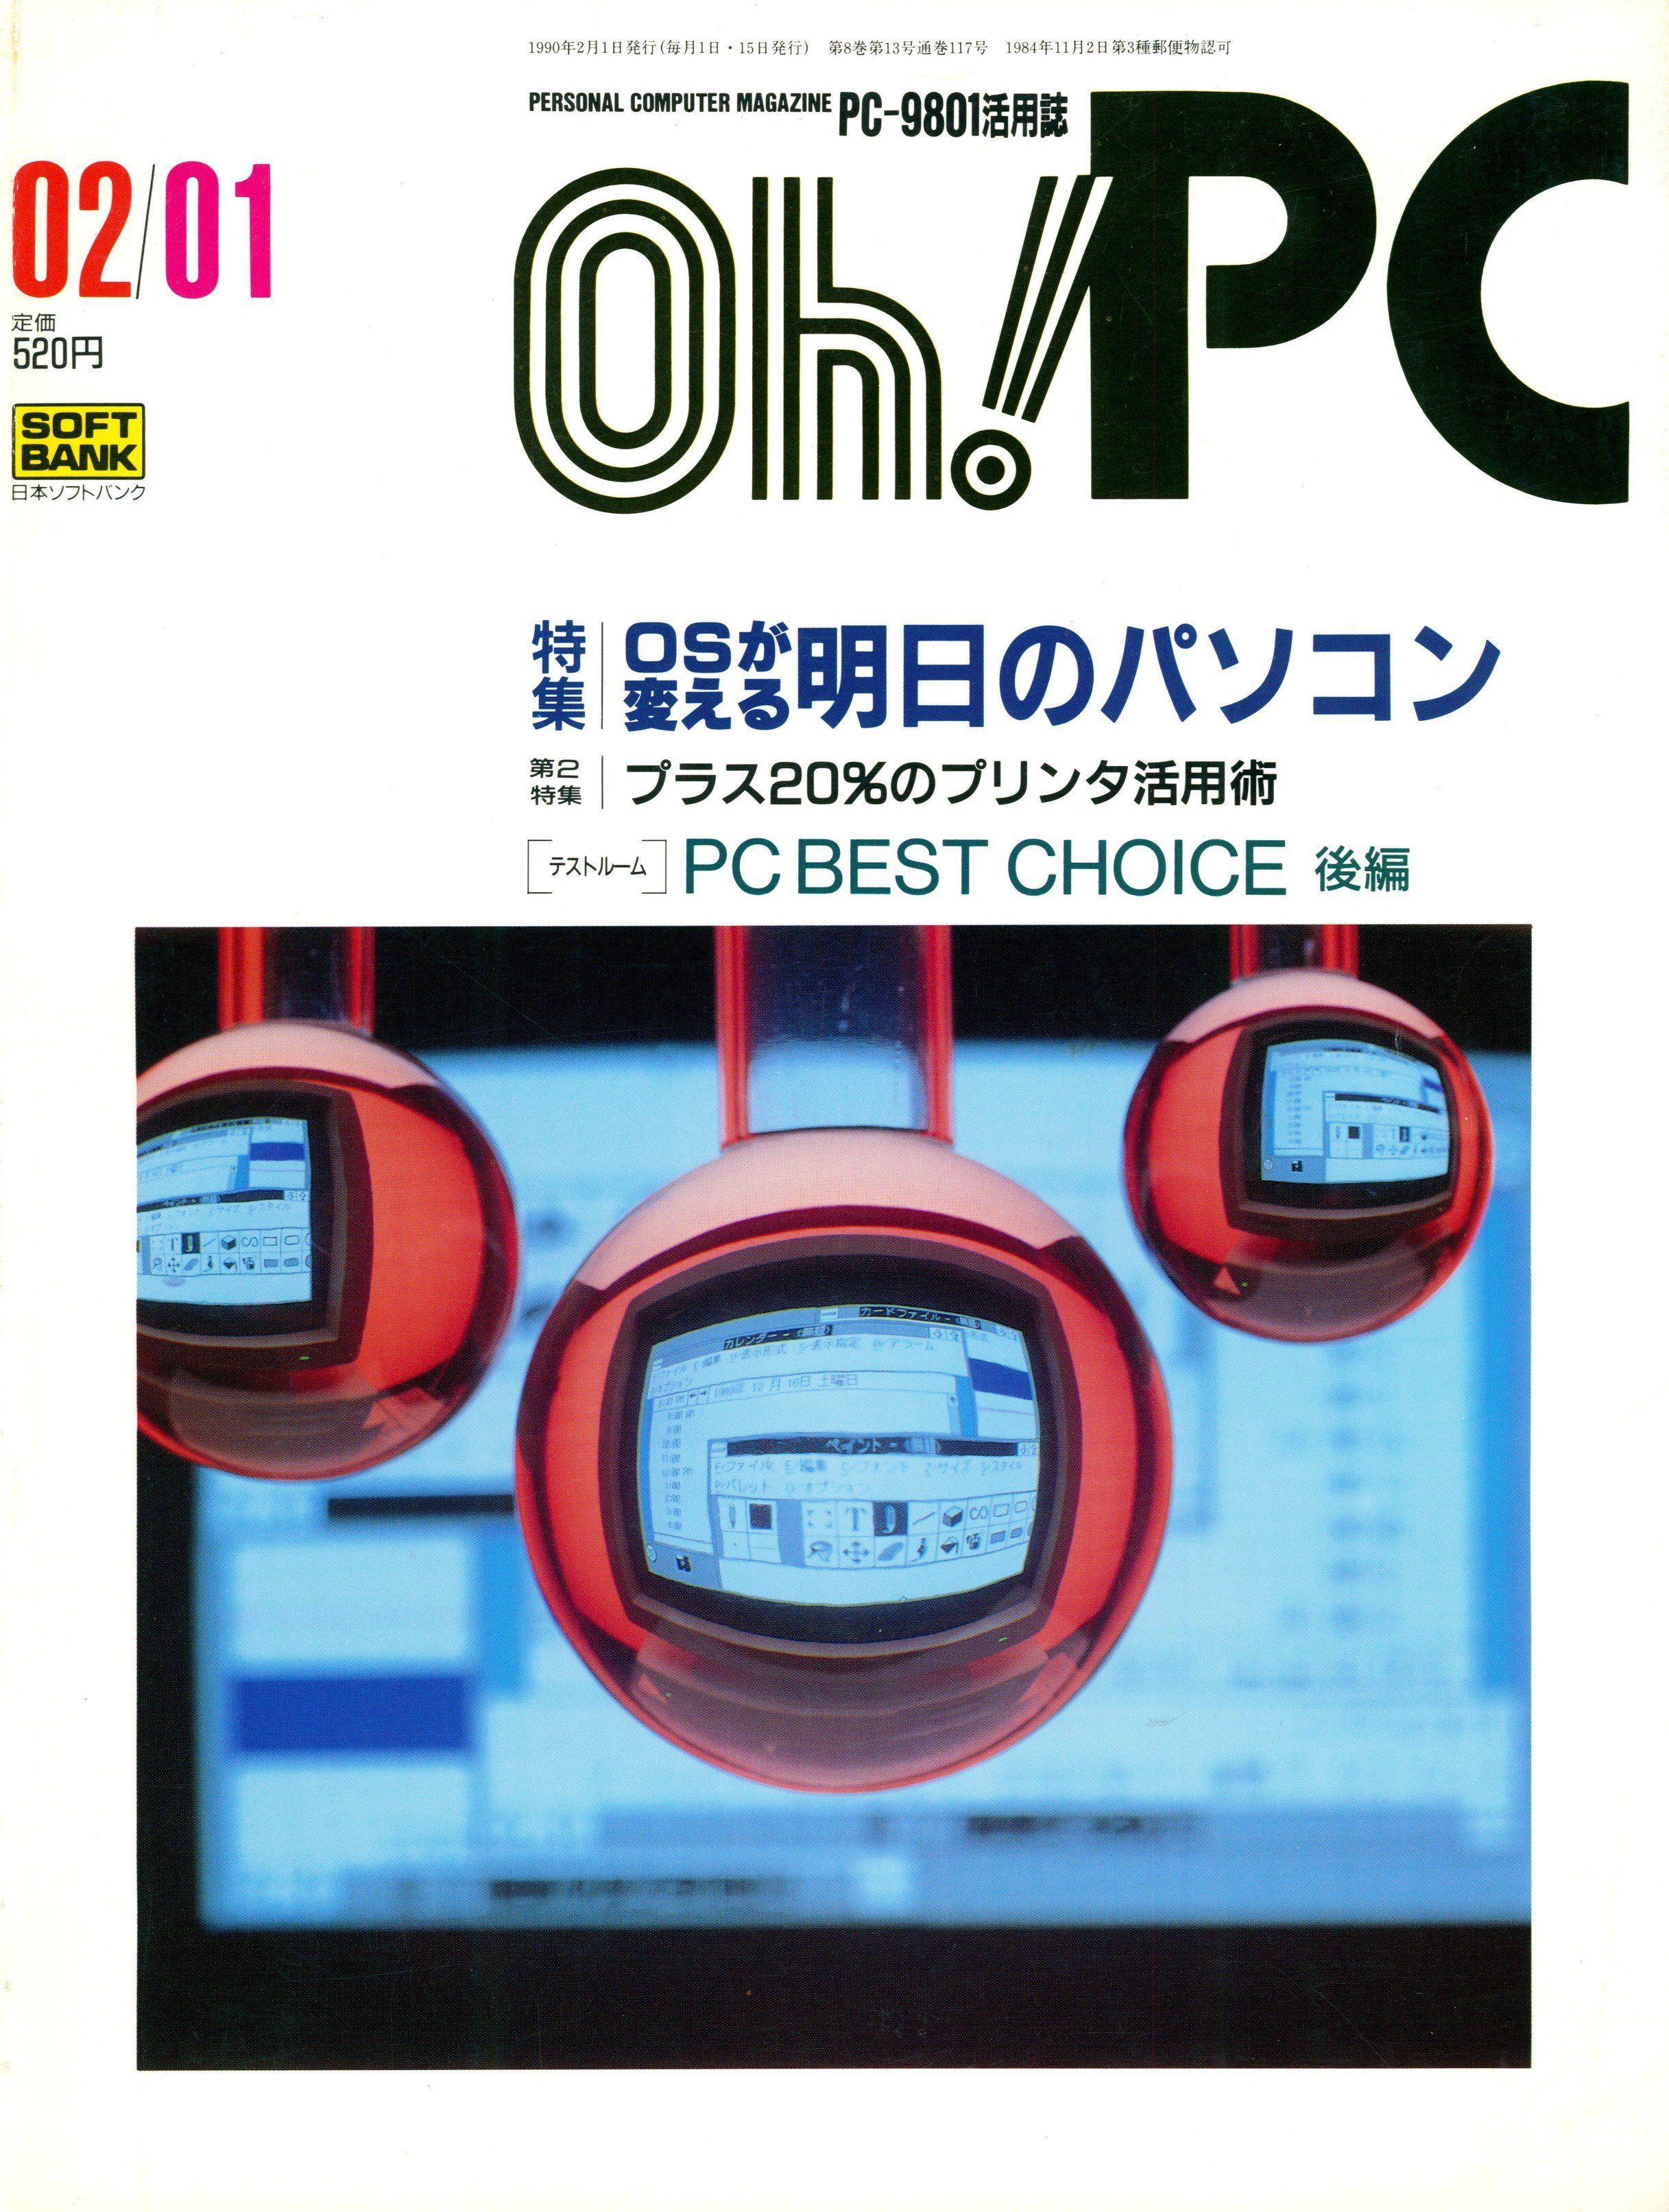 Oh! PC Issue 117 (Feb 01, 1990)